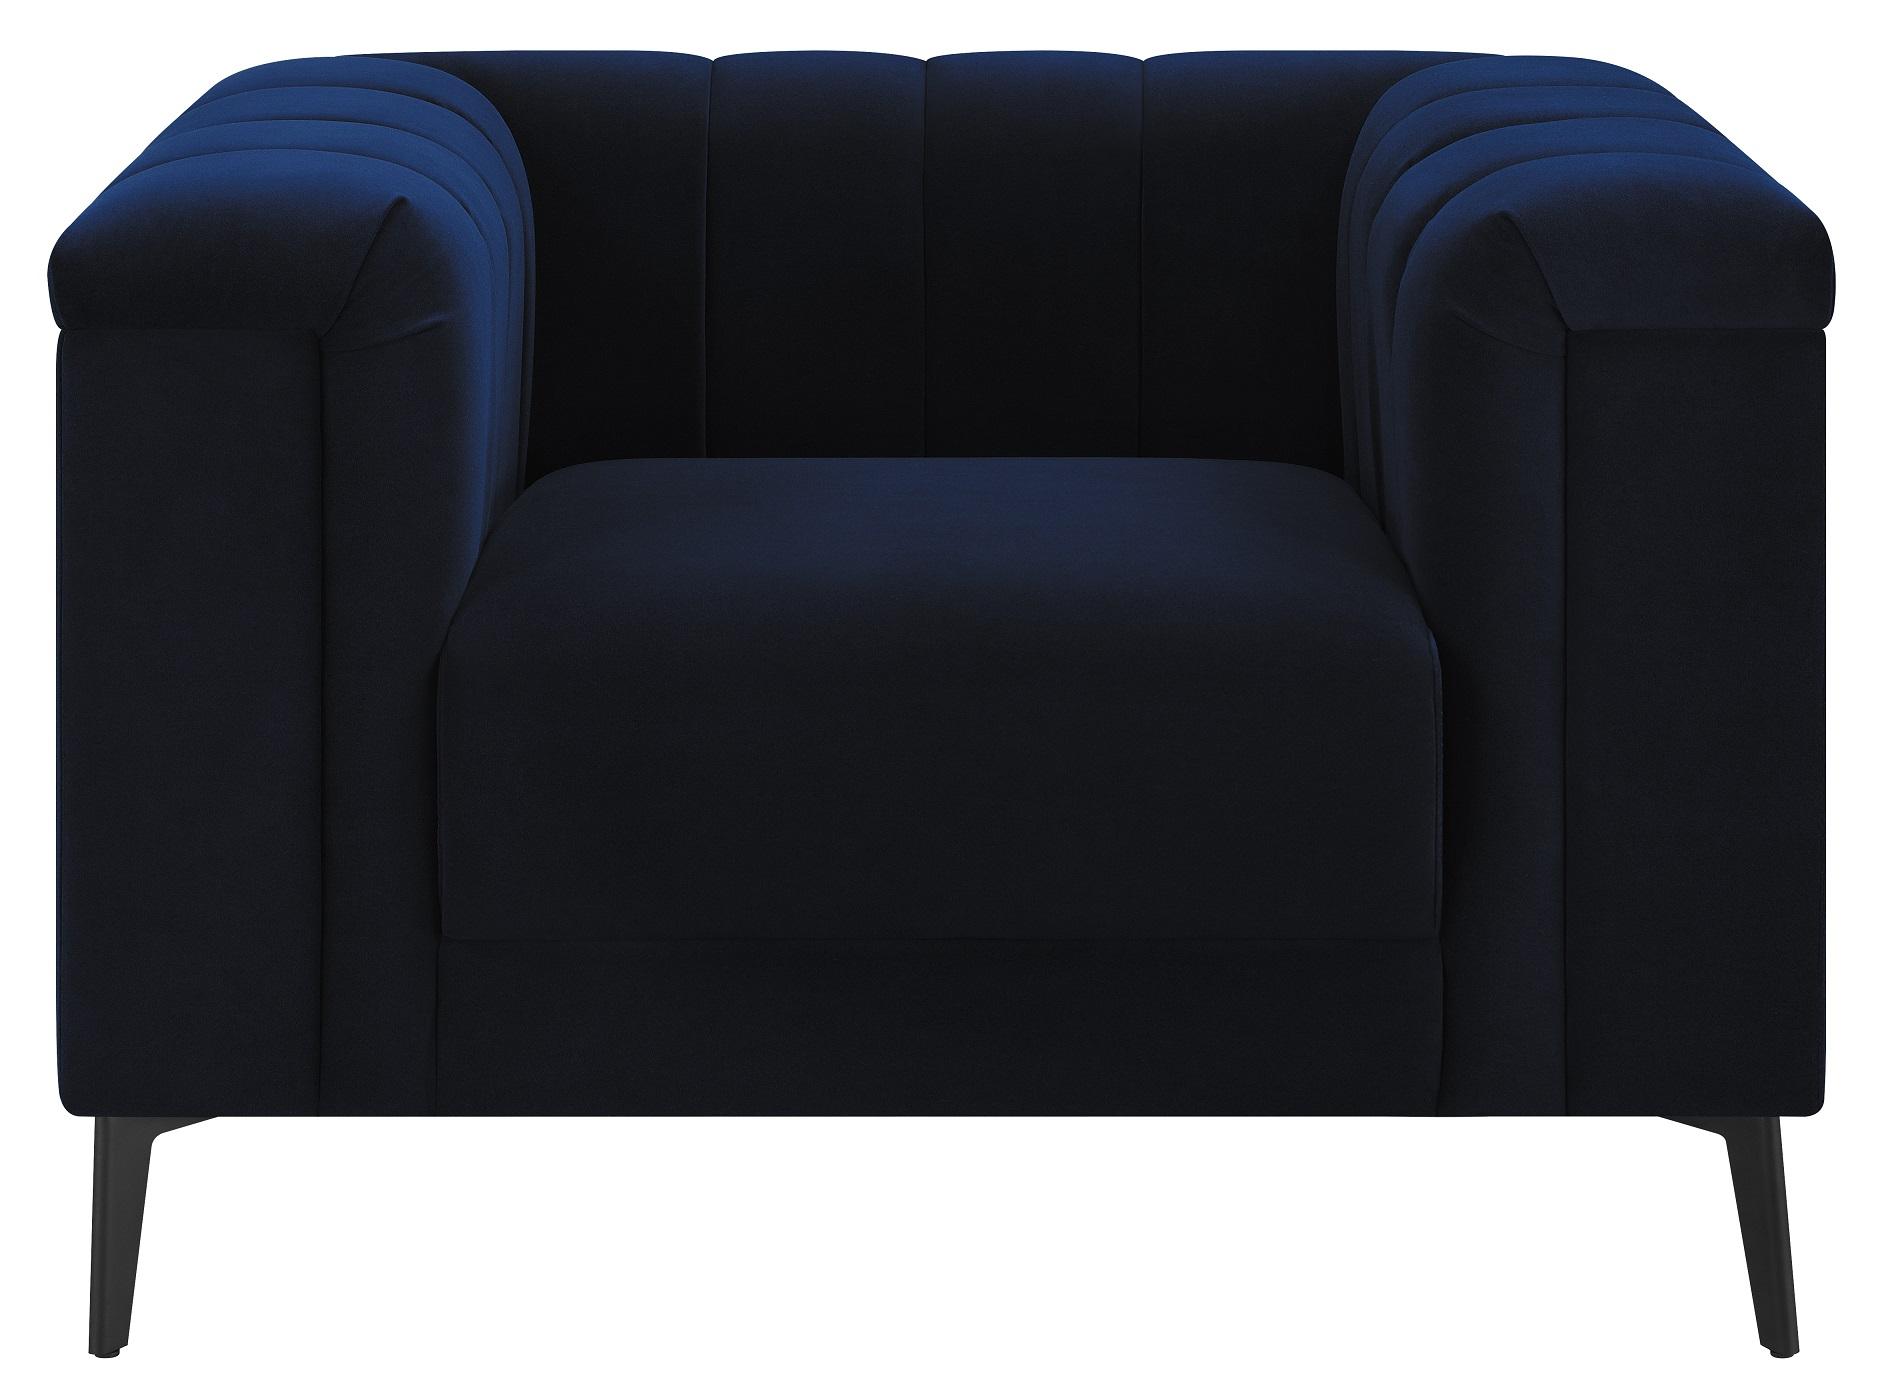 Transitional Arm Chair 509213 Chalet 509213 in Blue 